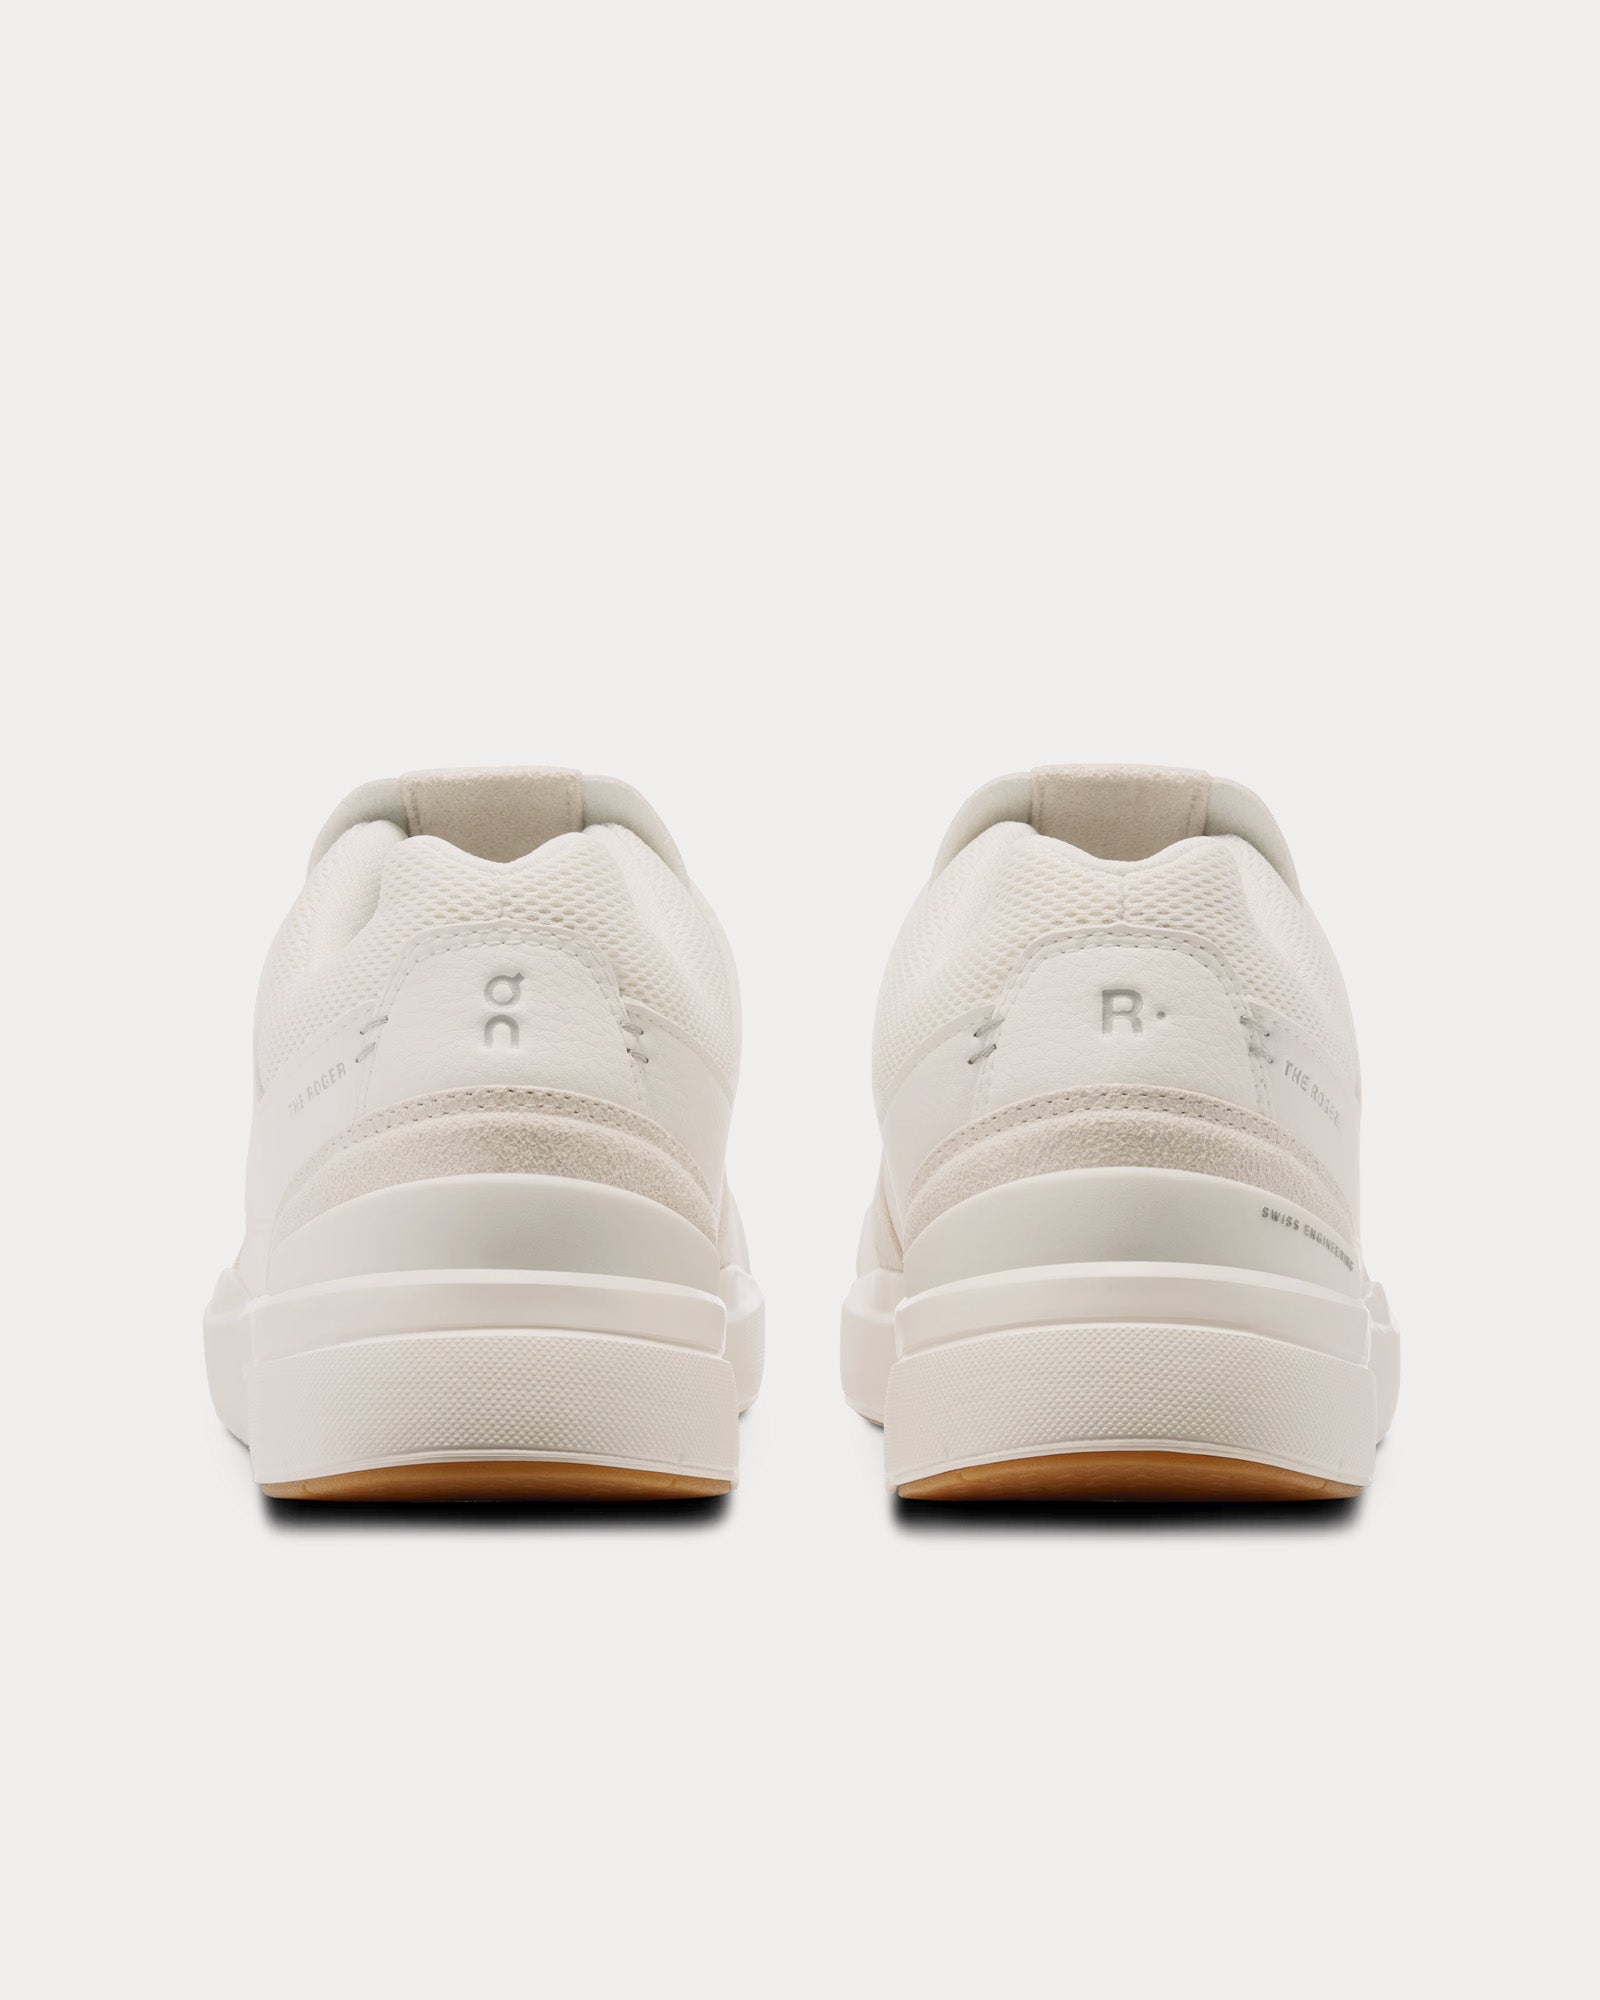 On Running - The Roger Clubhouse White / Sand Low Top Sneakers